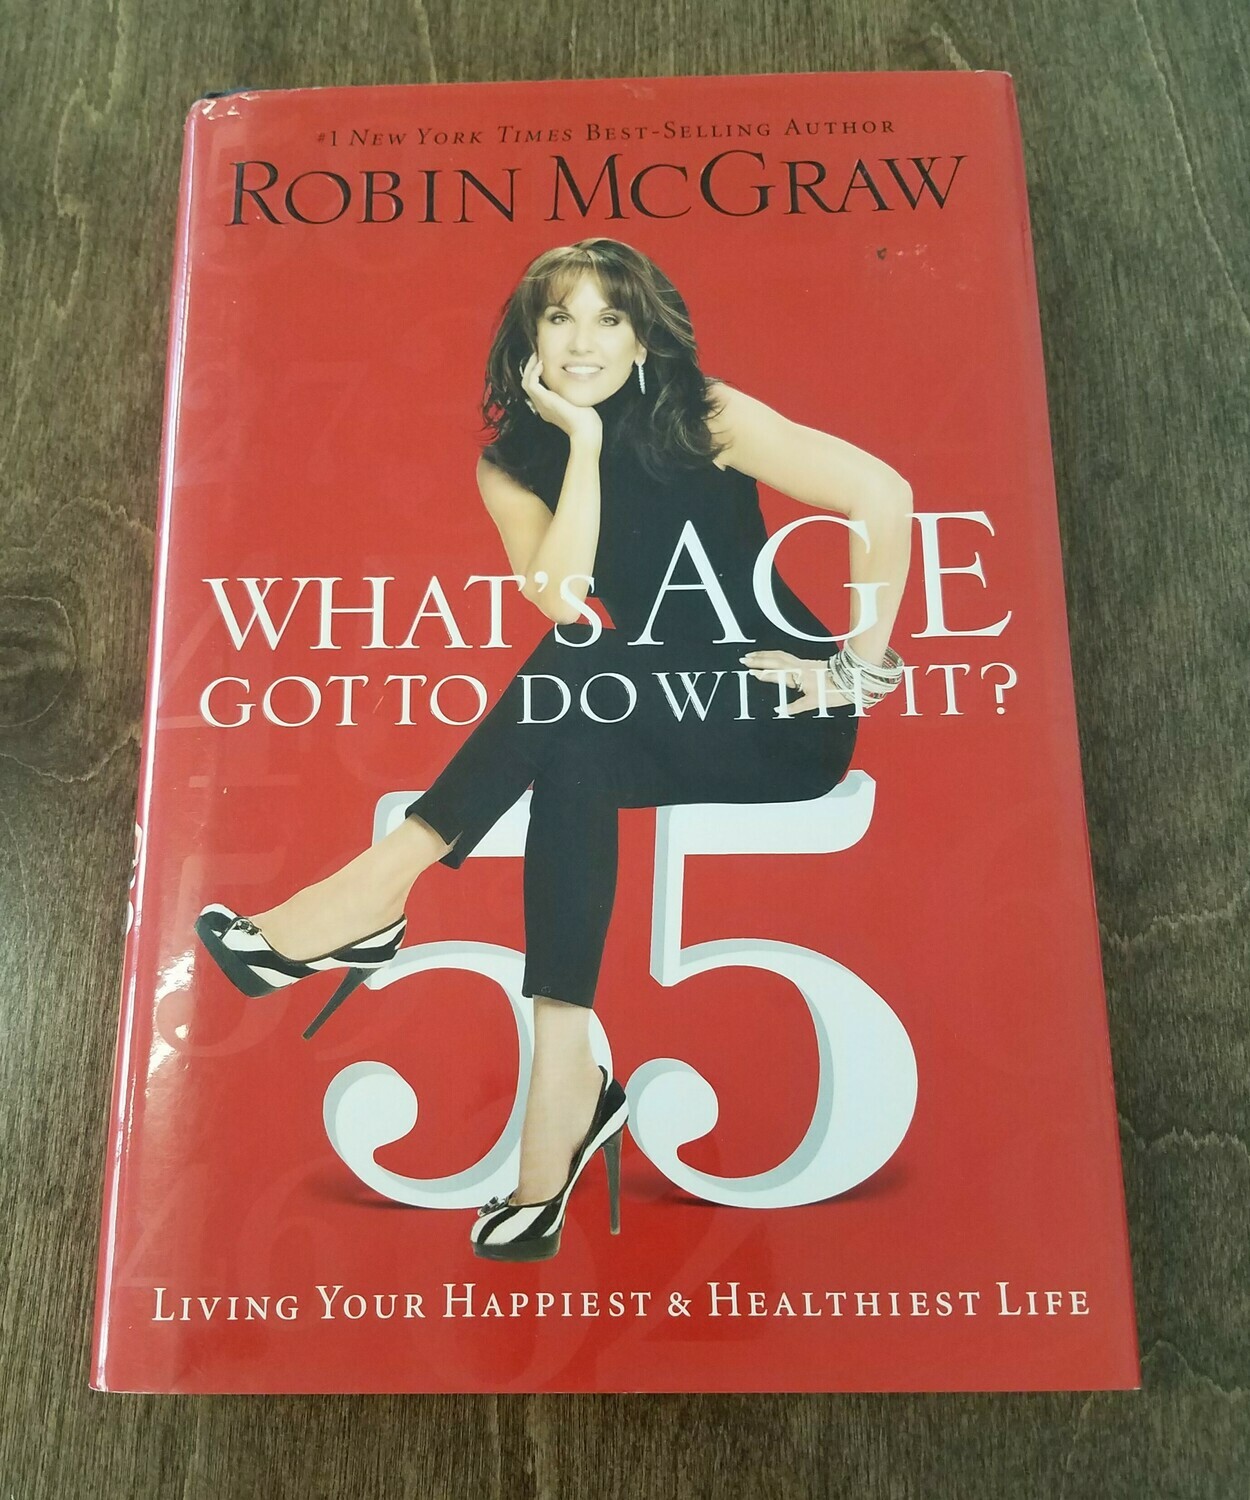 What's Age Got To Do With It? by Robin McGraw